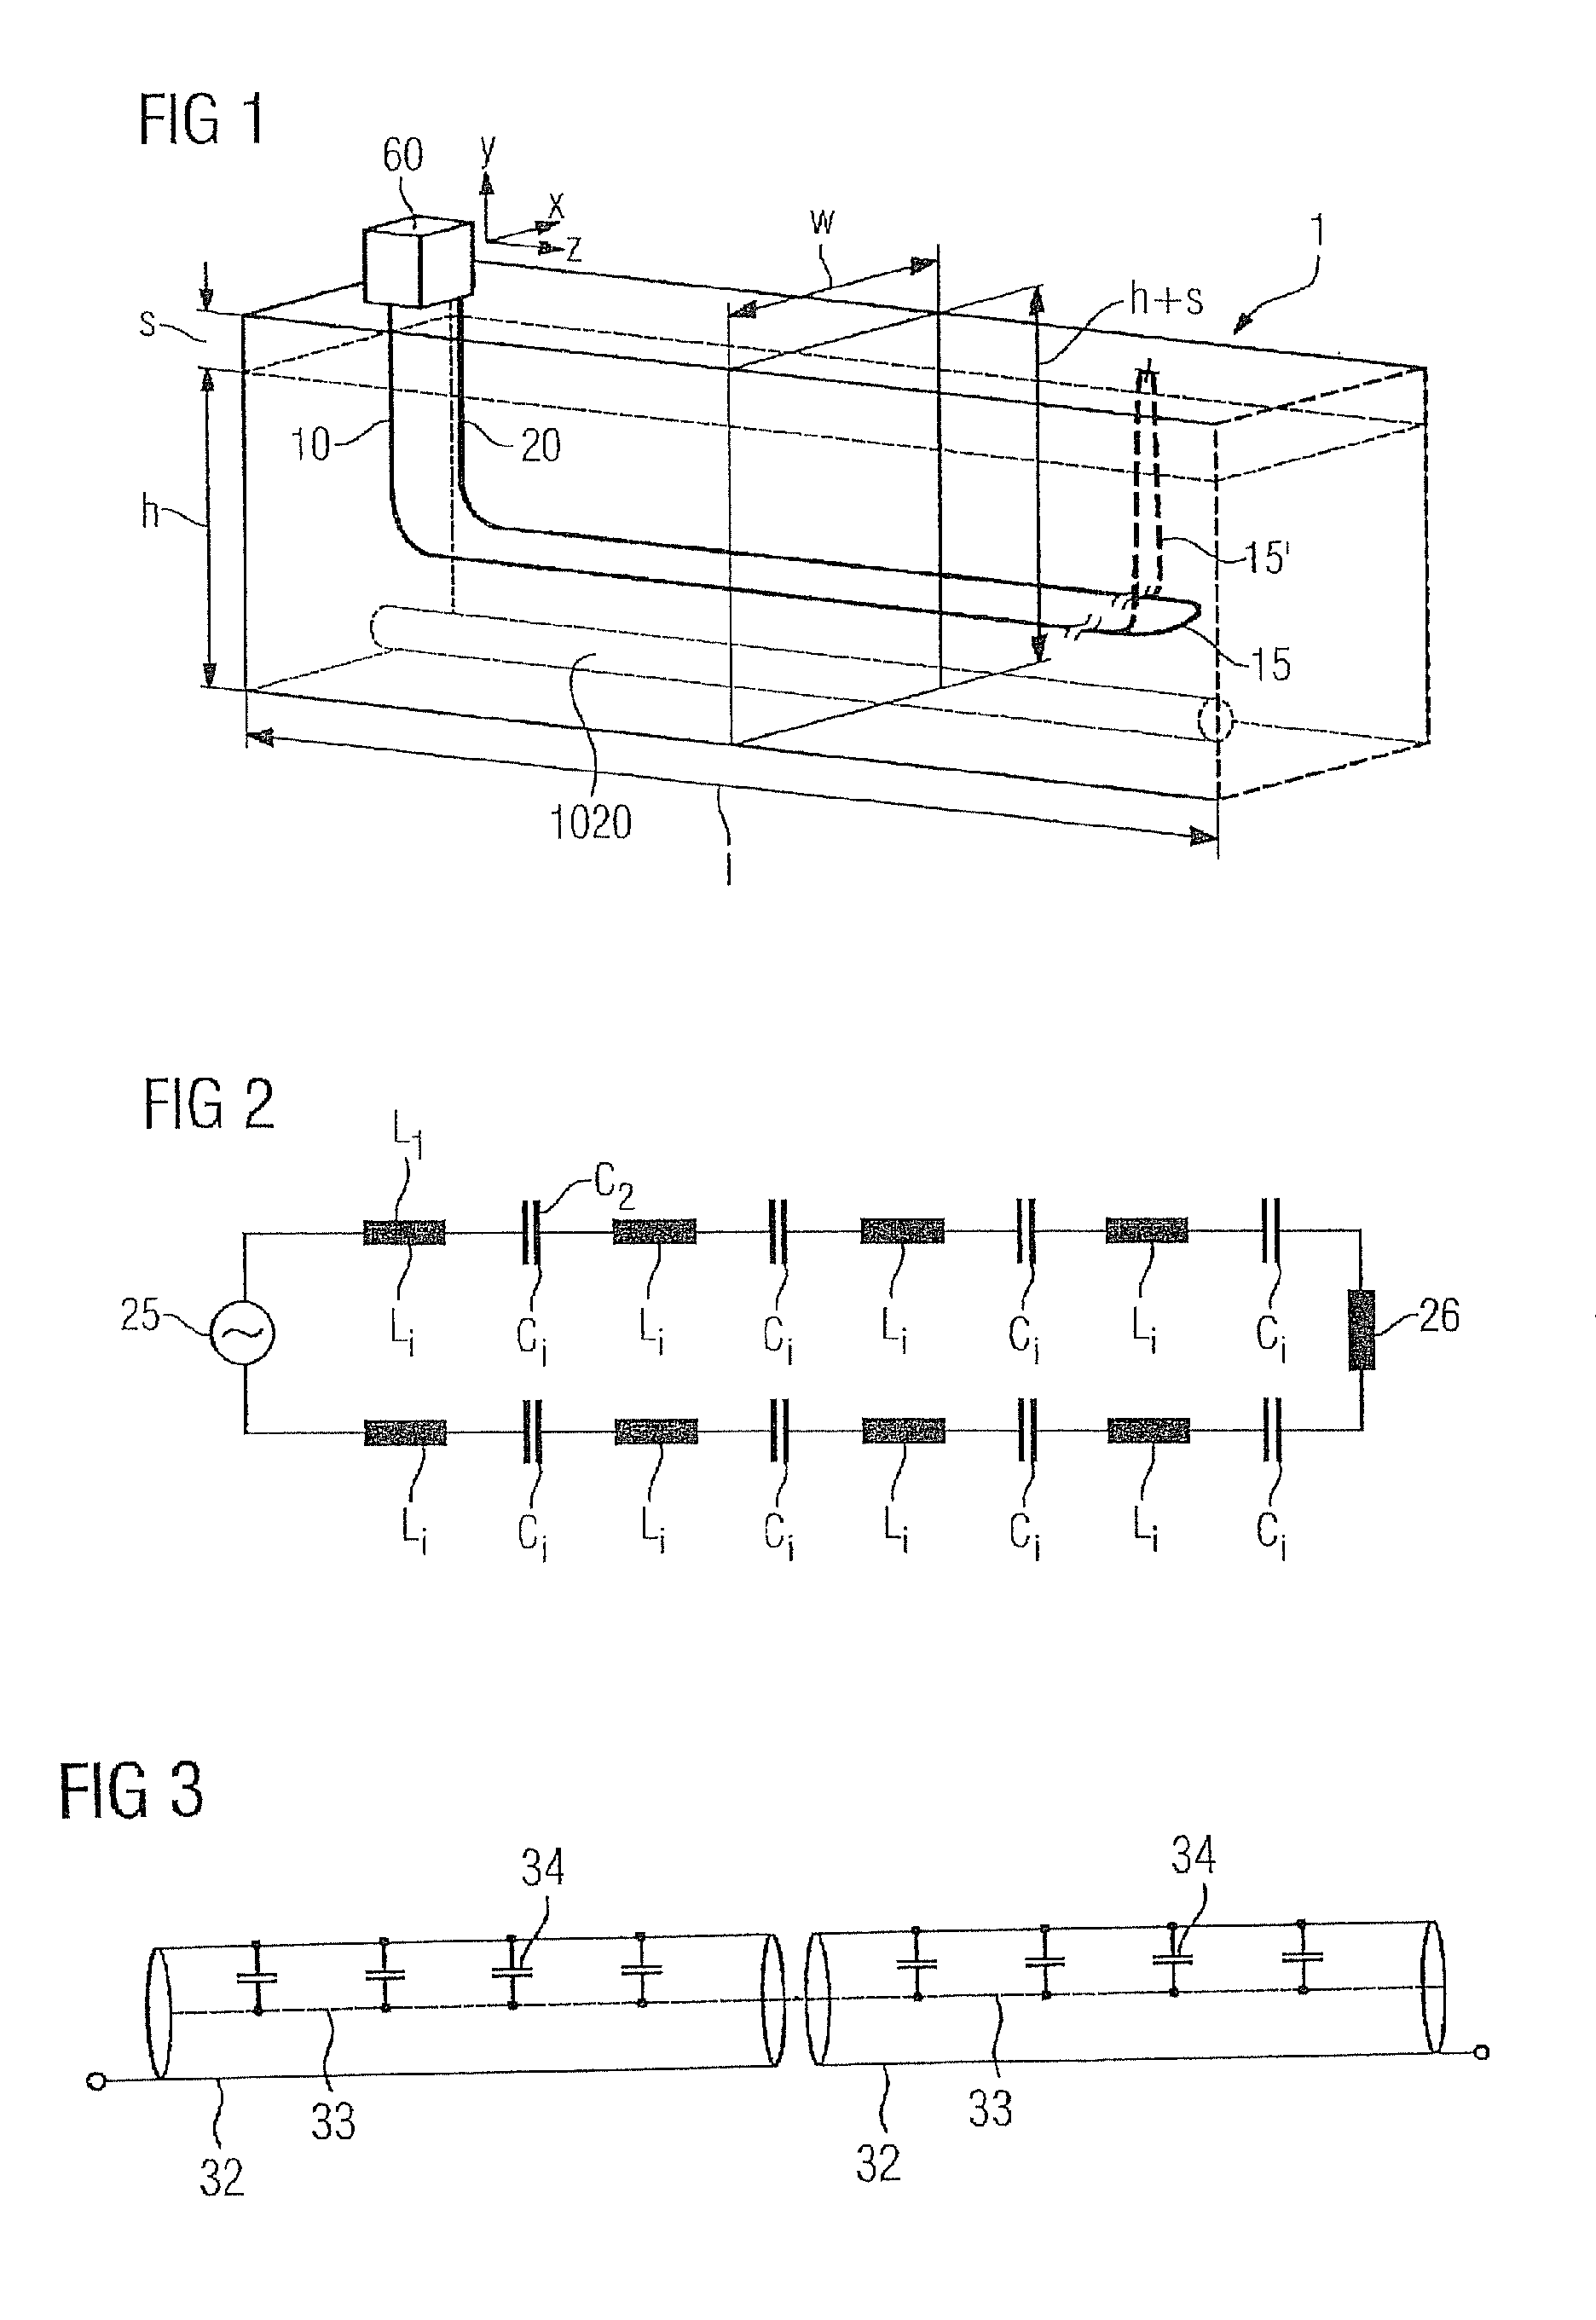 Apparatus for the inductive heating of oil sand and heavy oil deposits by way of current-carrying conductors